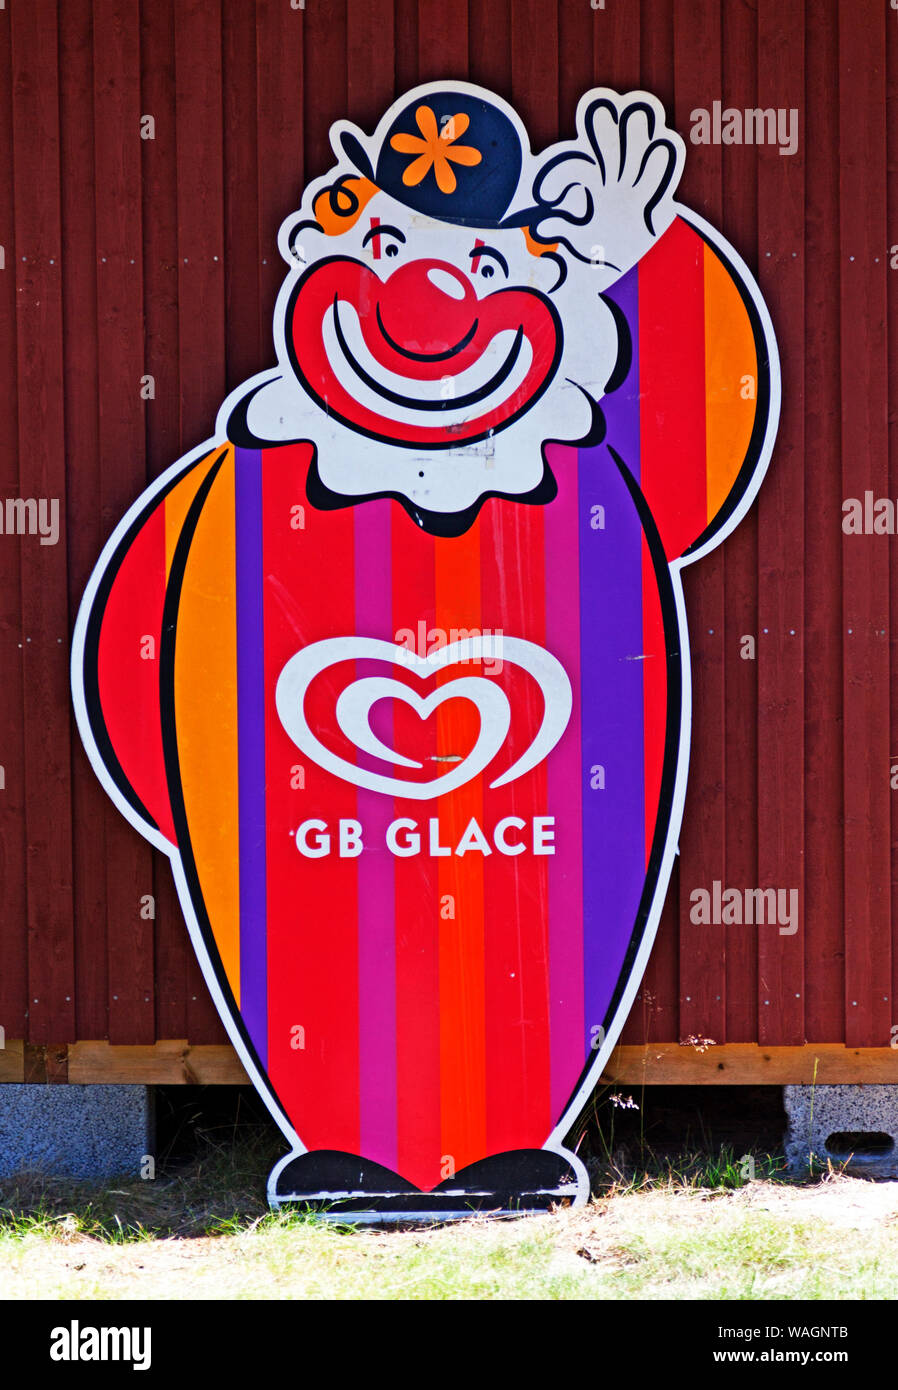 Gb glace logo hi-res stock photography and images - Alamy